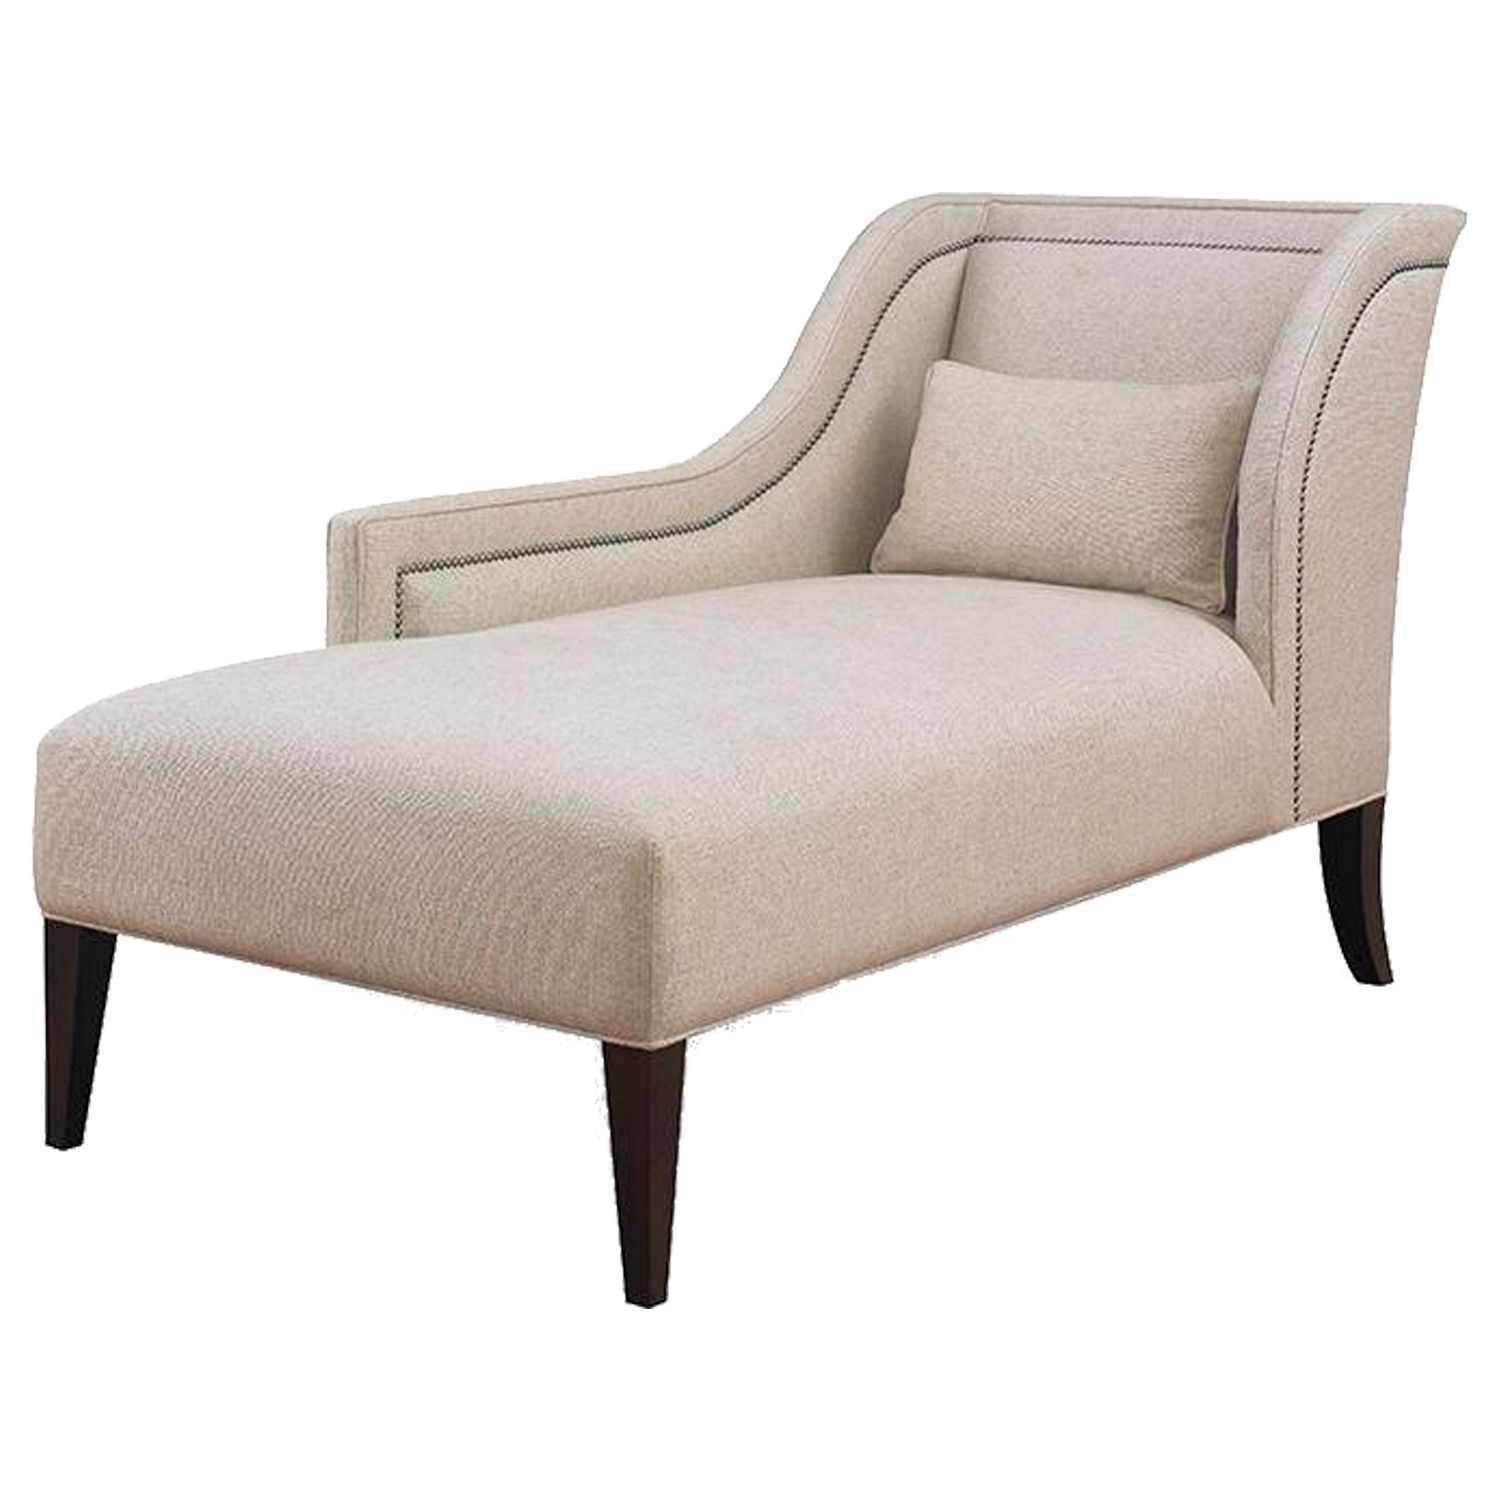 Well Known Upholstered Chaise Lounge Chairs Regarding Buy Pasadena One Arm Chaisekravet – Made To Order Designer (View 3 of 15)